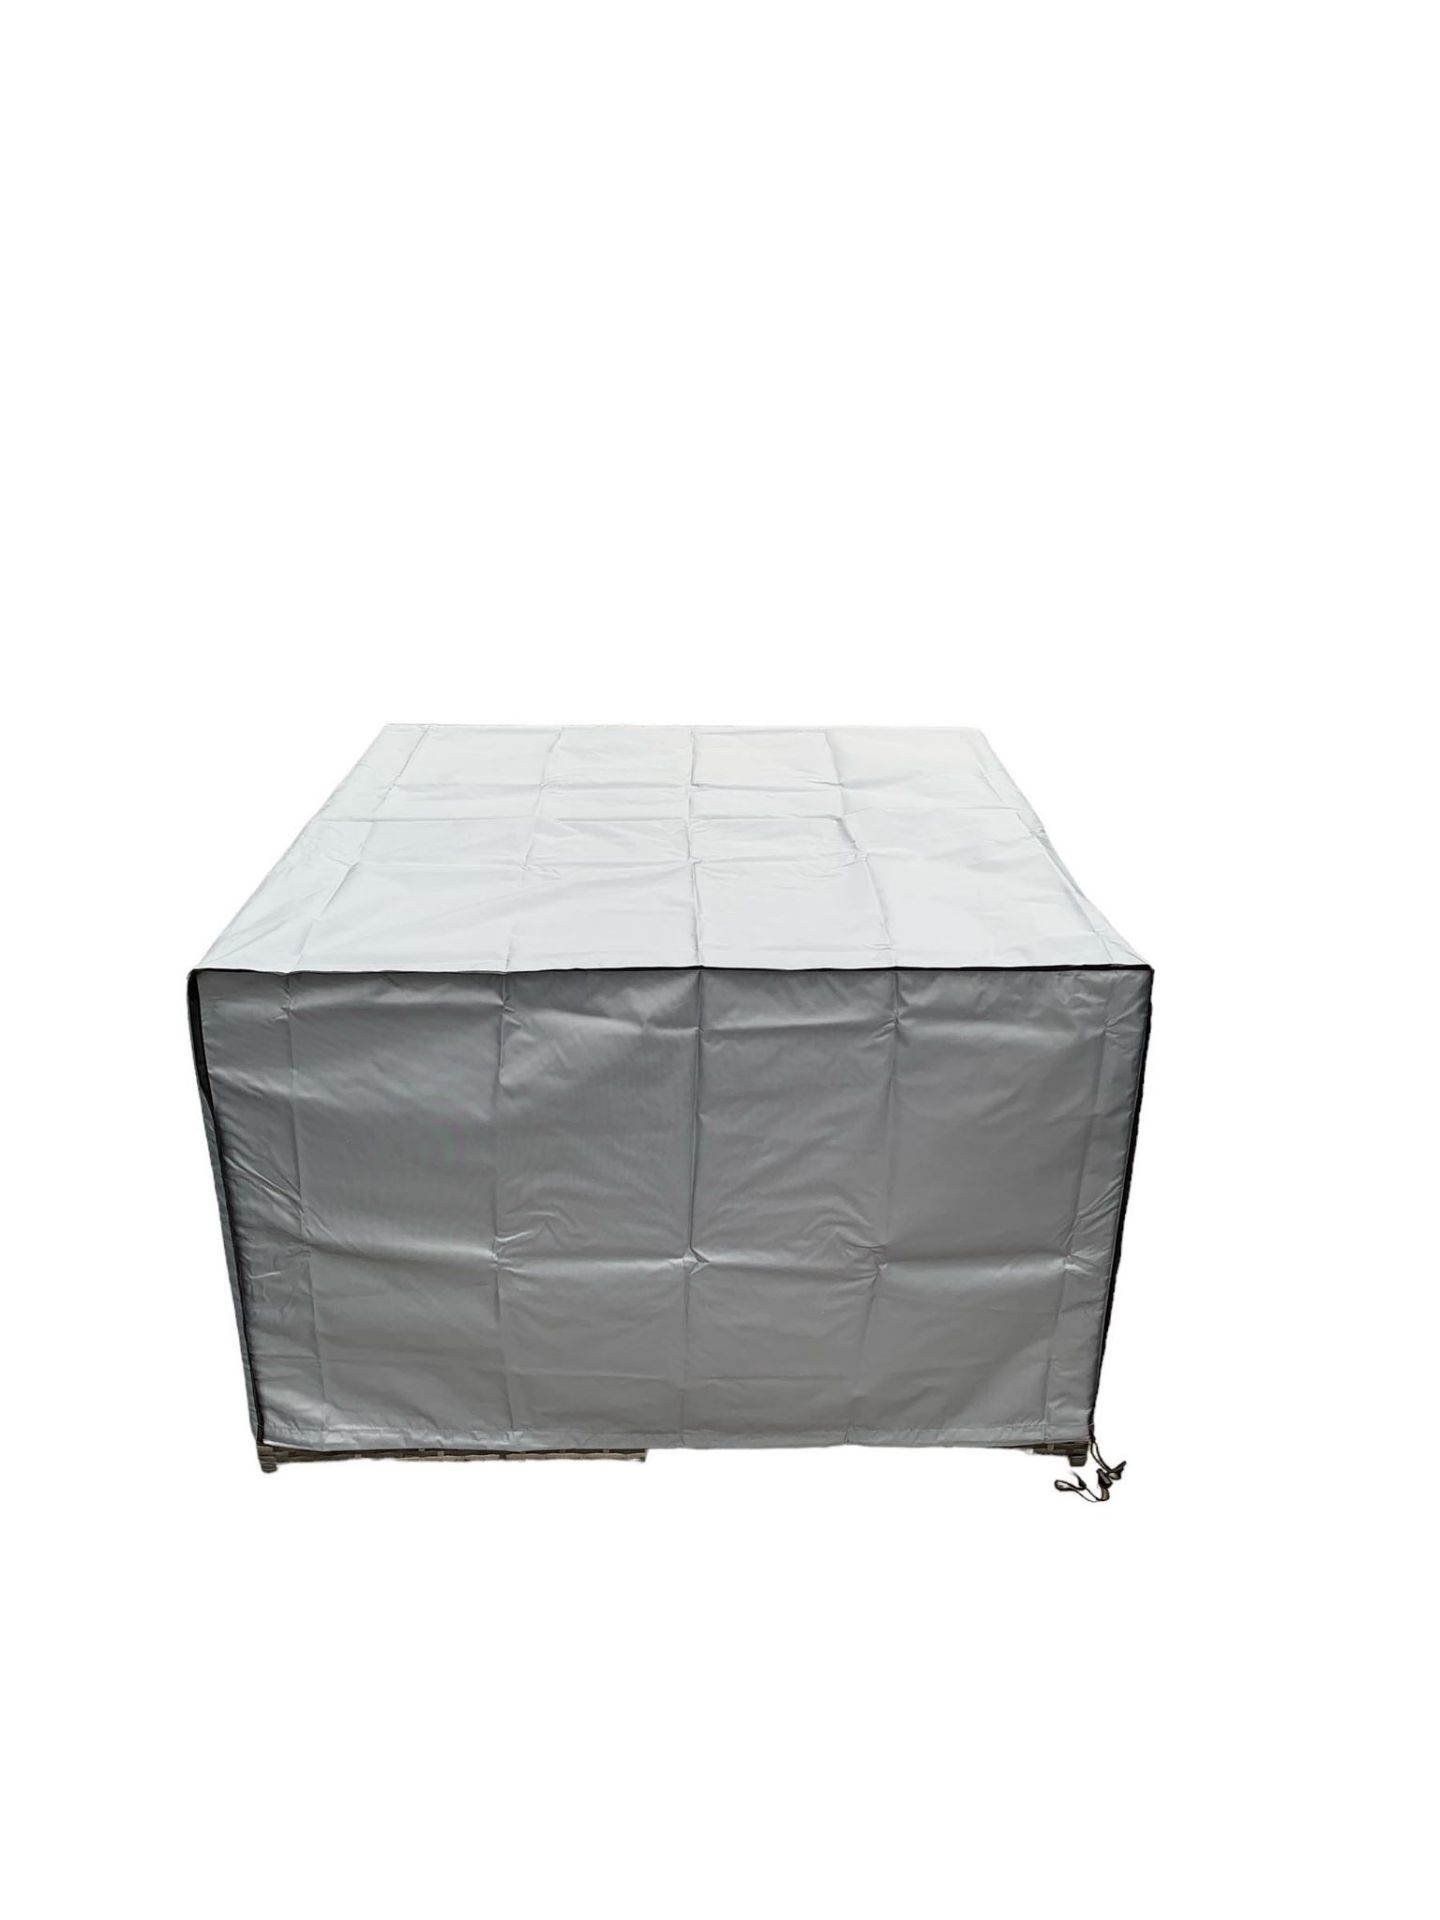 BRAND NEW BLACK CUBE GARDEN FURNITURE SET OUTDOOR 9 PIECES + RAIN COVER - Image 3 of 3